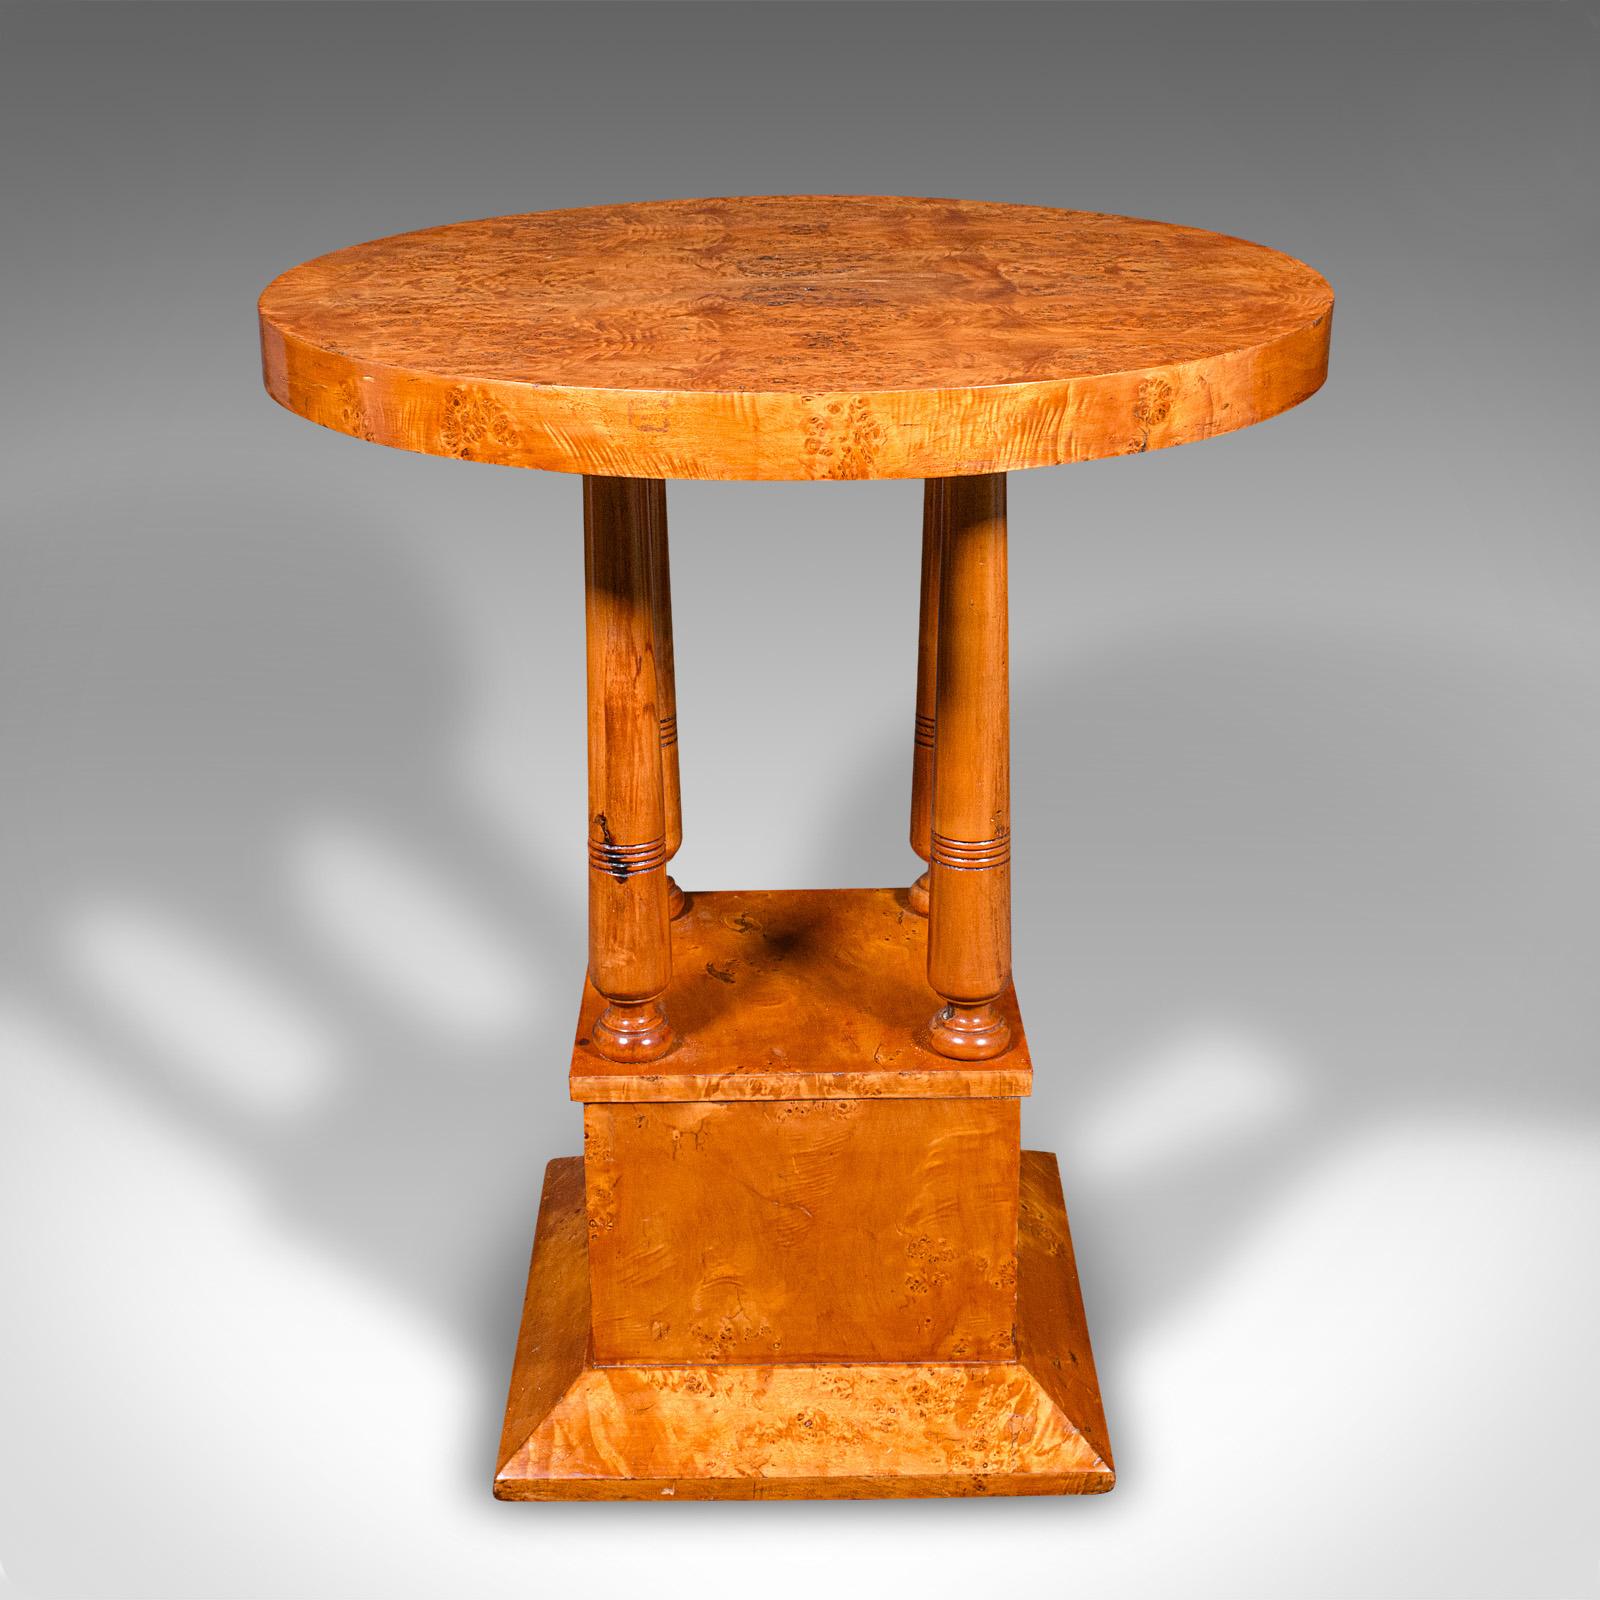 Vintage Podium Hall Table, French, Birds Eye Maple, Lamp, Side, Art Deco, C.1930 For Sale 1